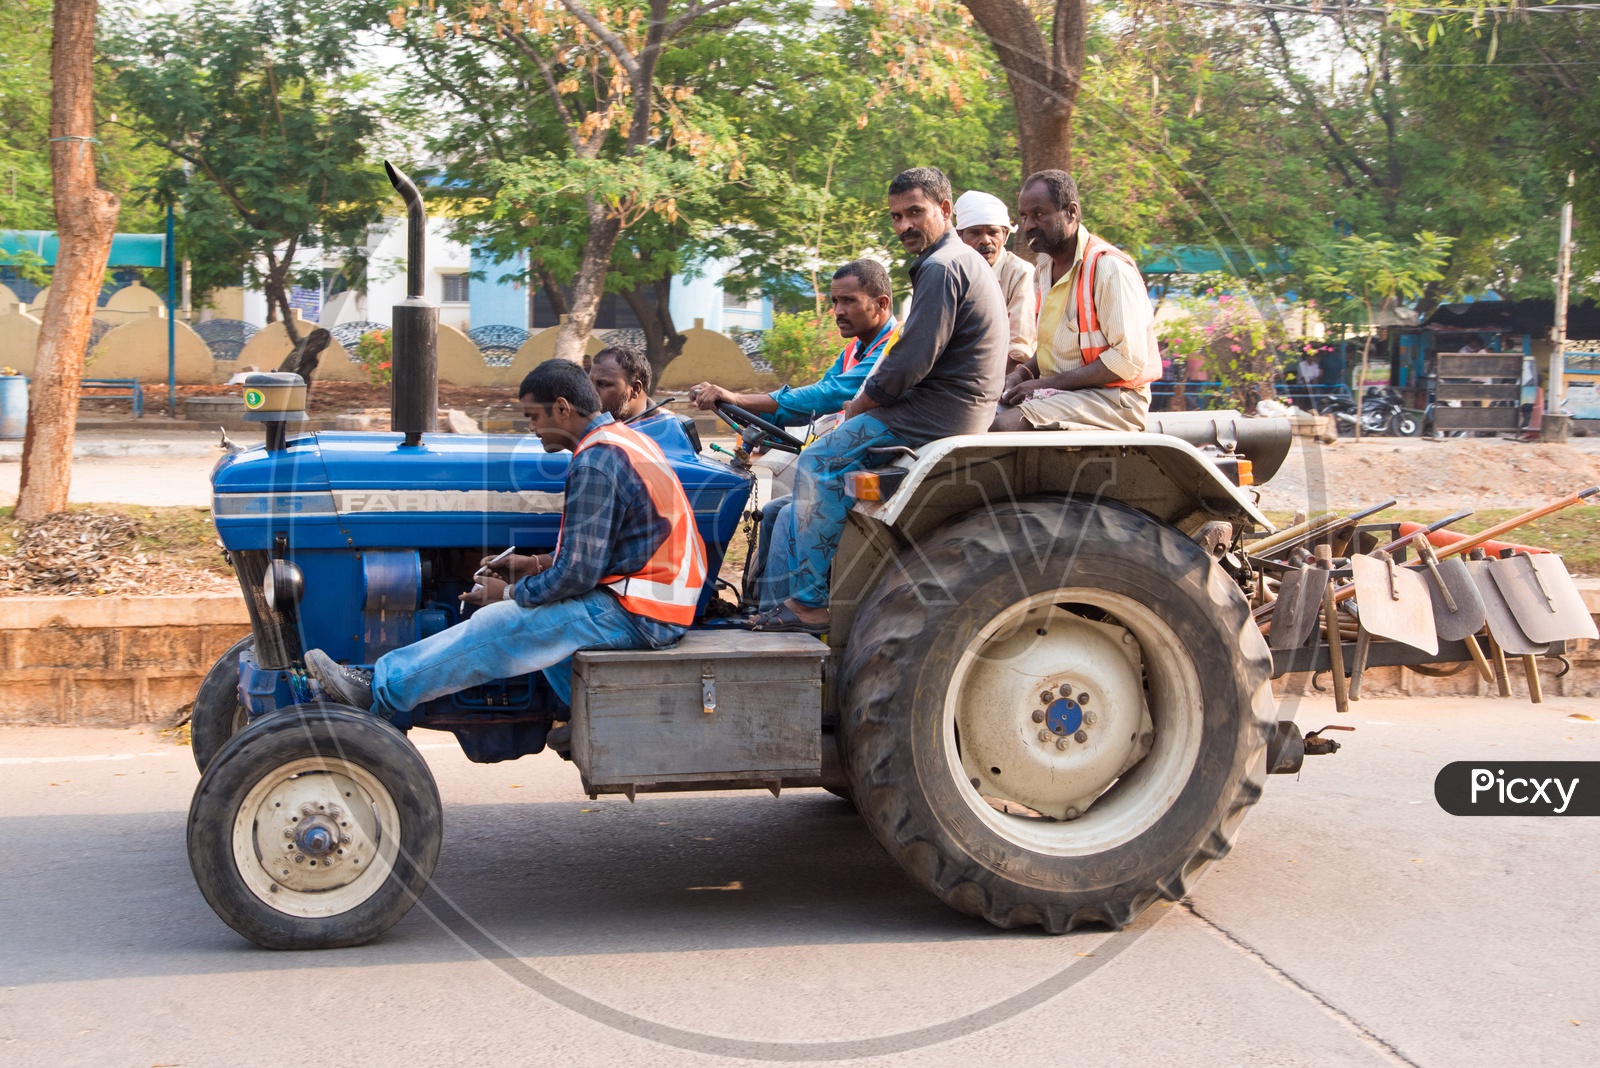 HMDA Workers & Gardeners riding on a tractor